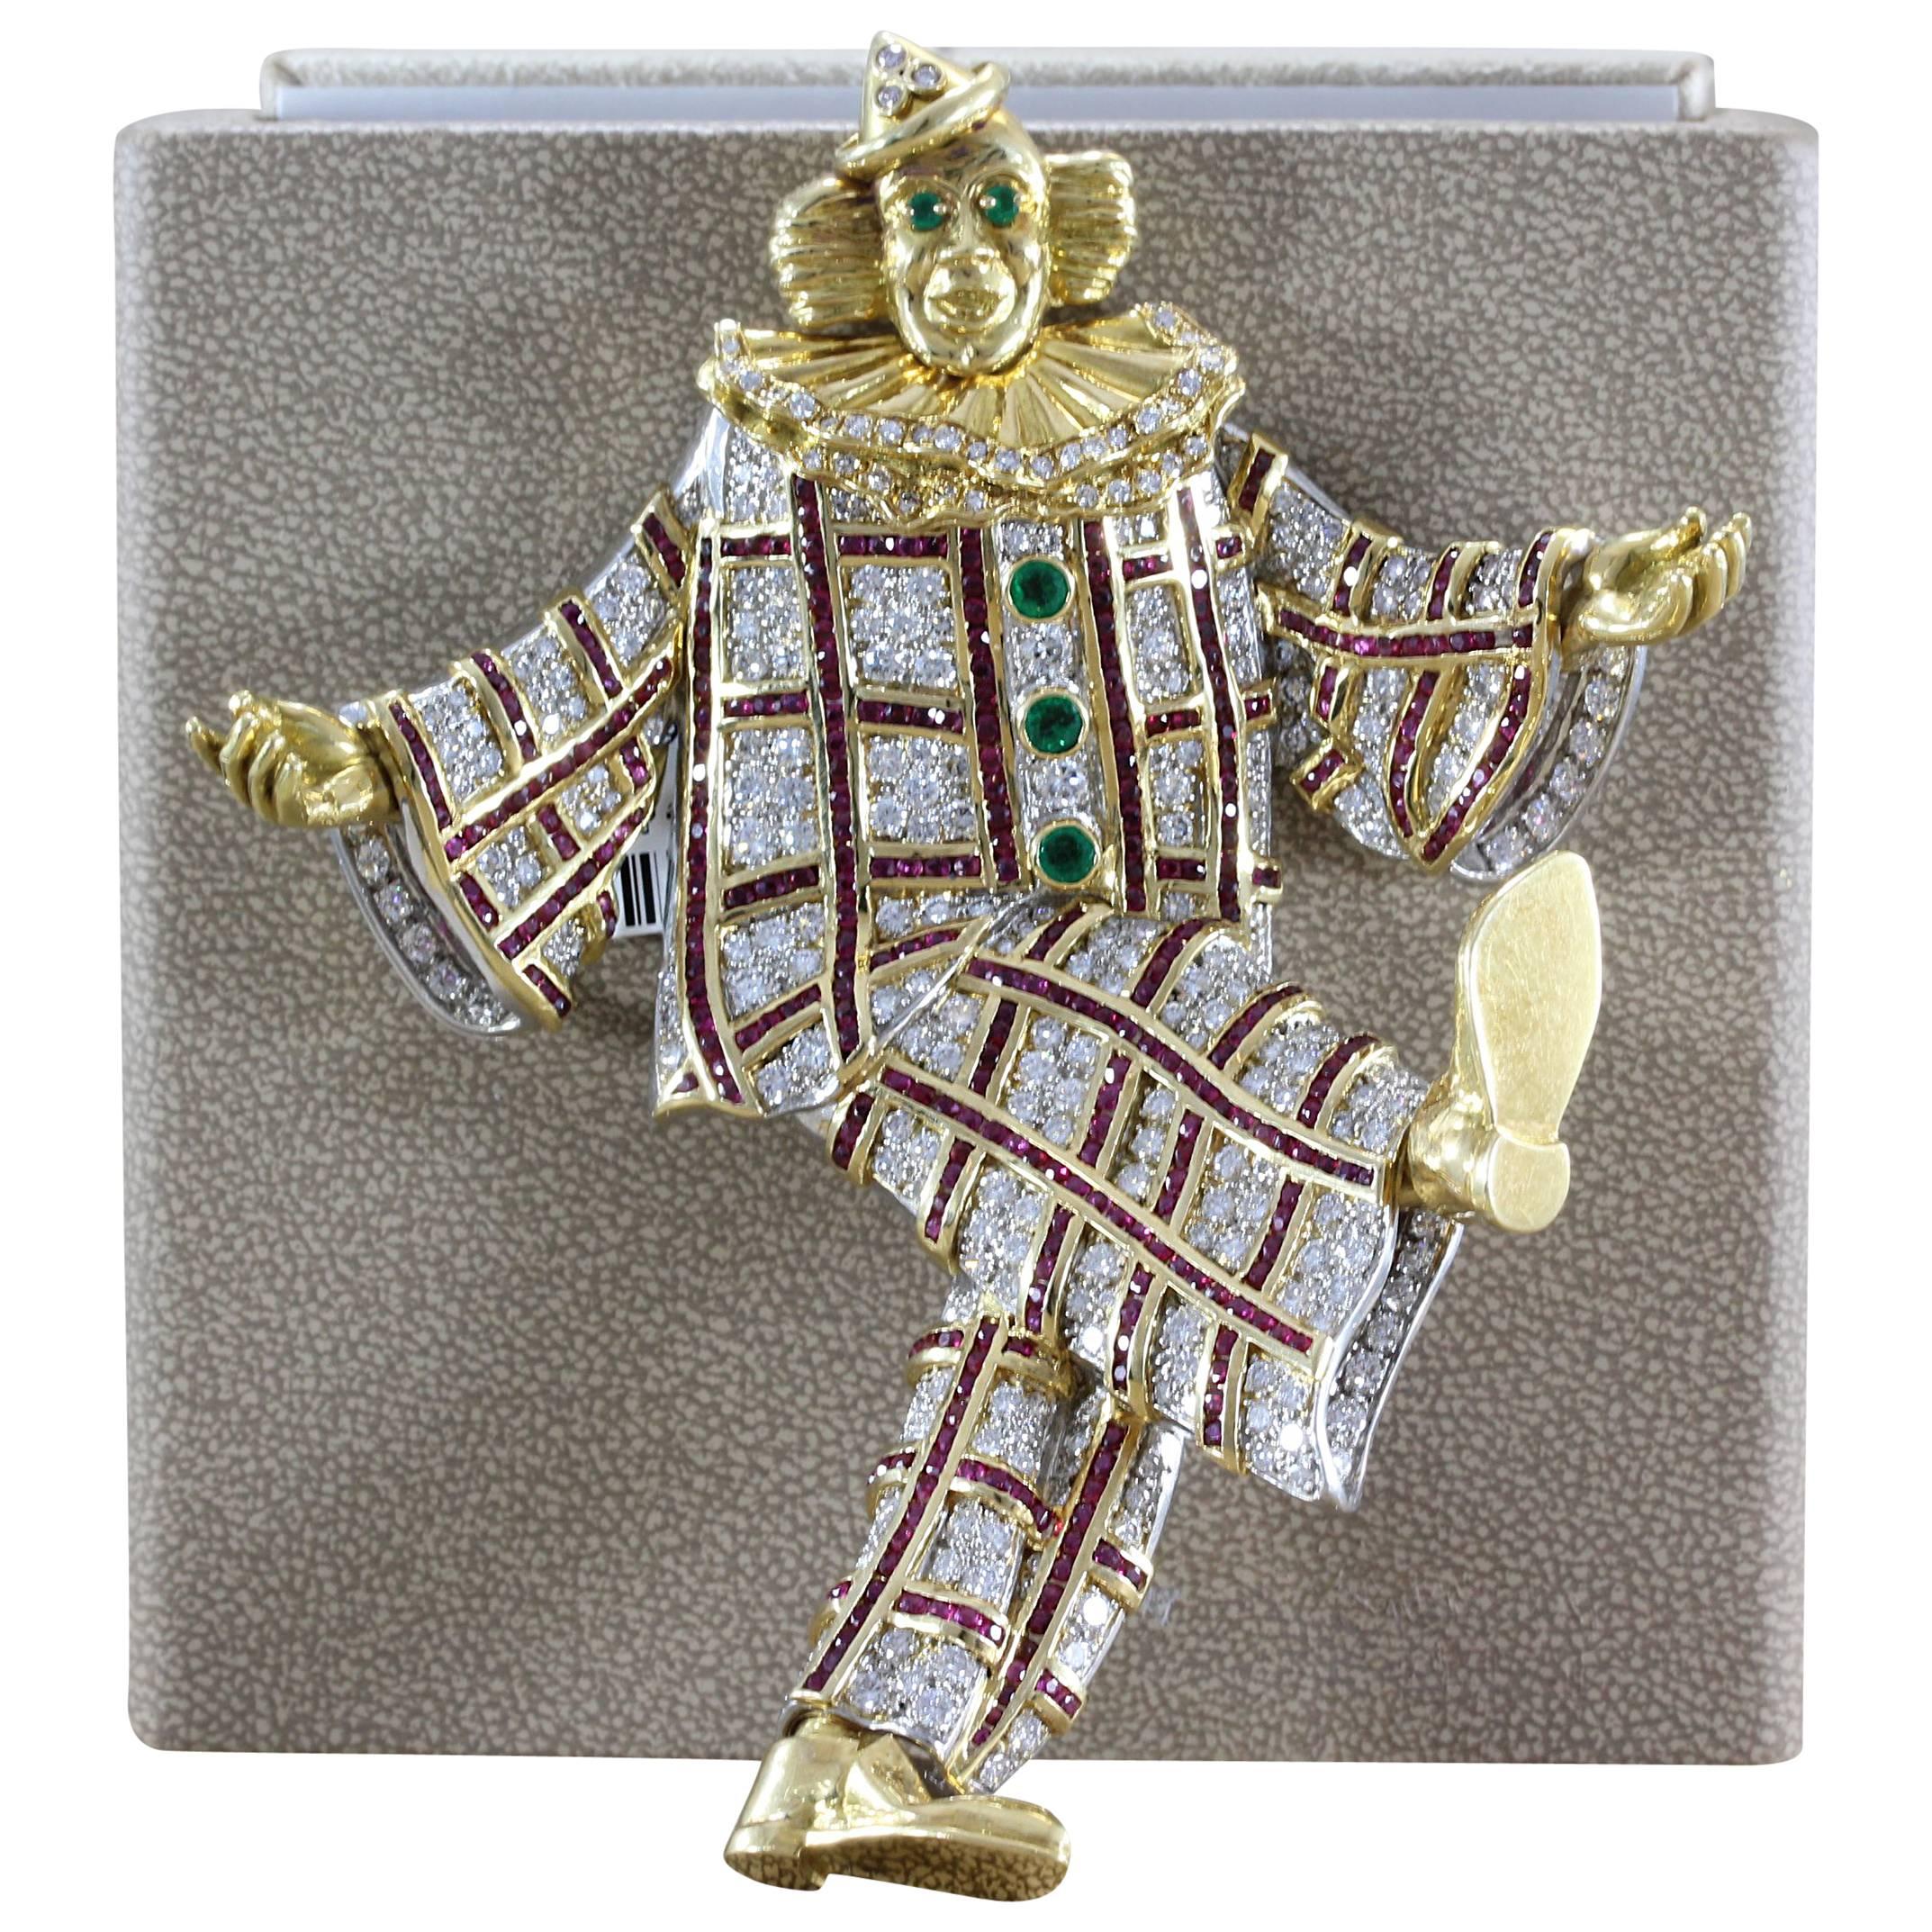 We aren’t clowning around here! This brooch features approximately 16 carats of VS quality full cut diamonds. 4.50 carats of vivid red rubies, set in 18K yellow gold and platinum, run up down and across the clowns gem studded suit. Half a carat of